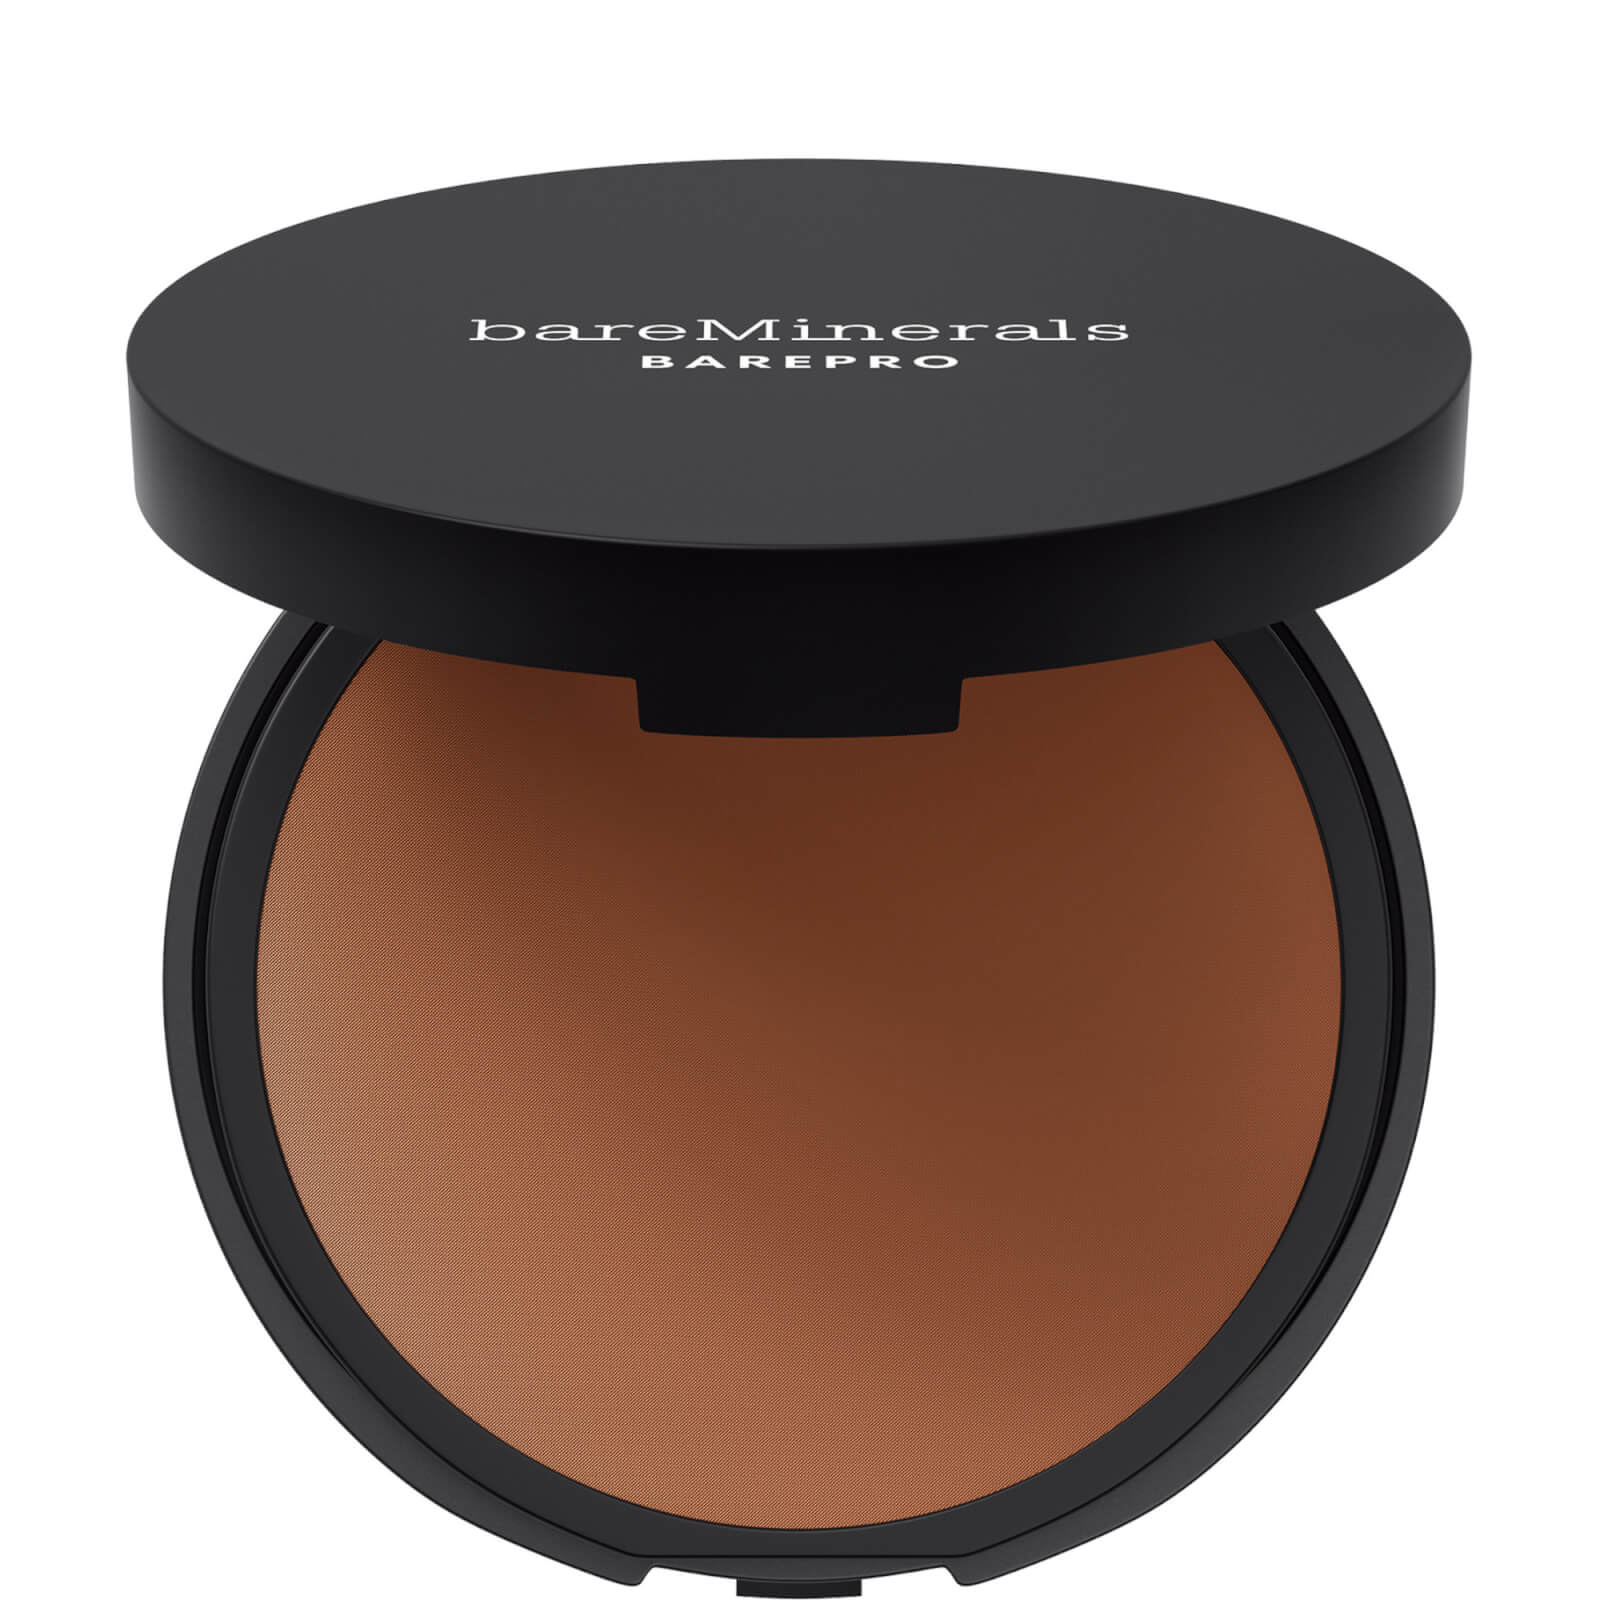 Image of bareMinerals BAREPRO Pressed 16 Hour Foundation 10g (Various Shades) - Deep 60 Cool